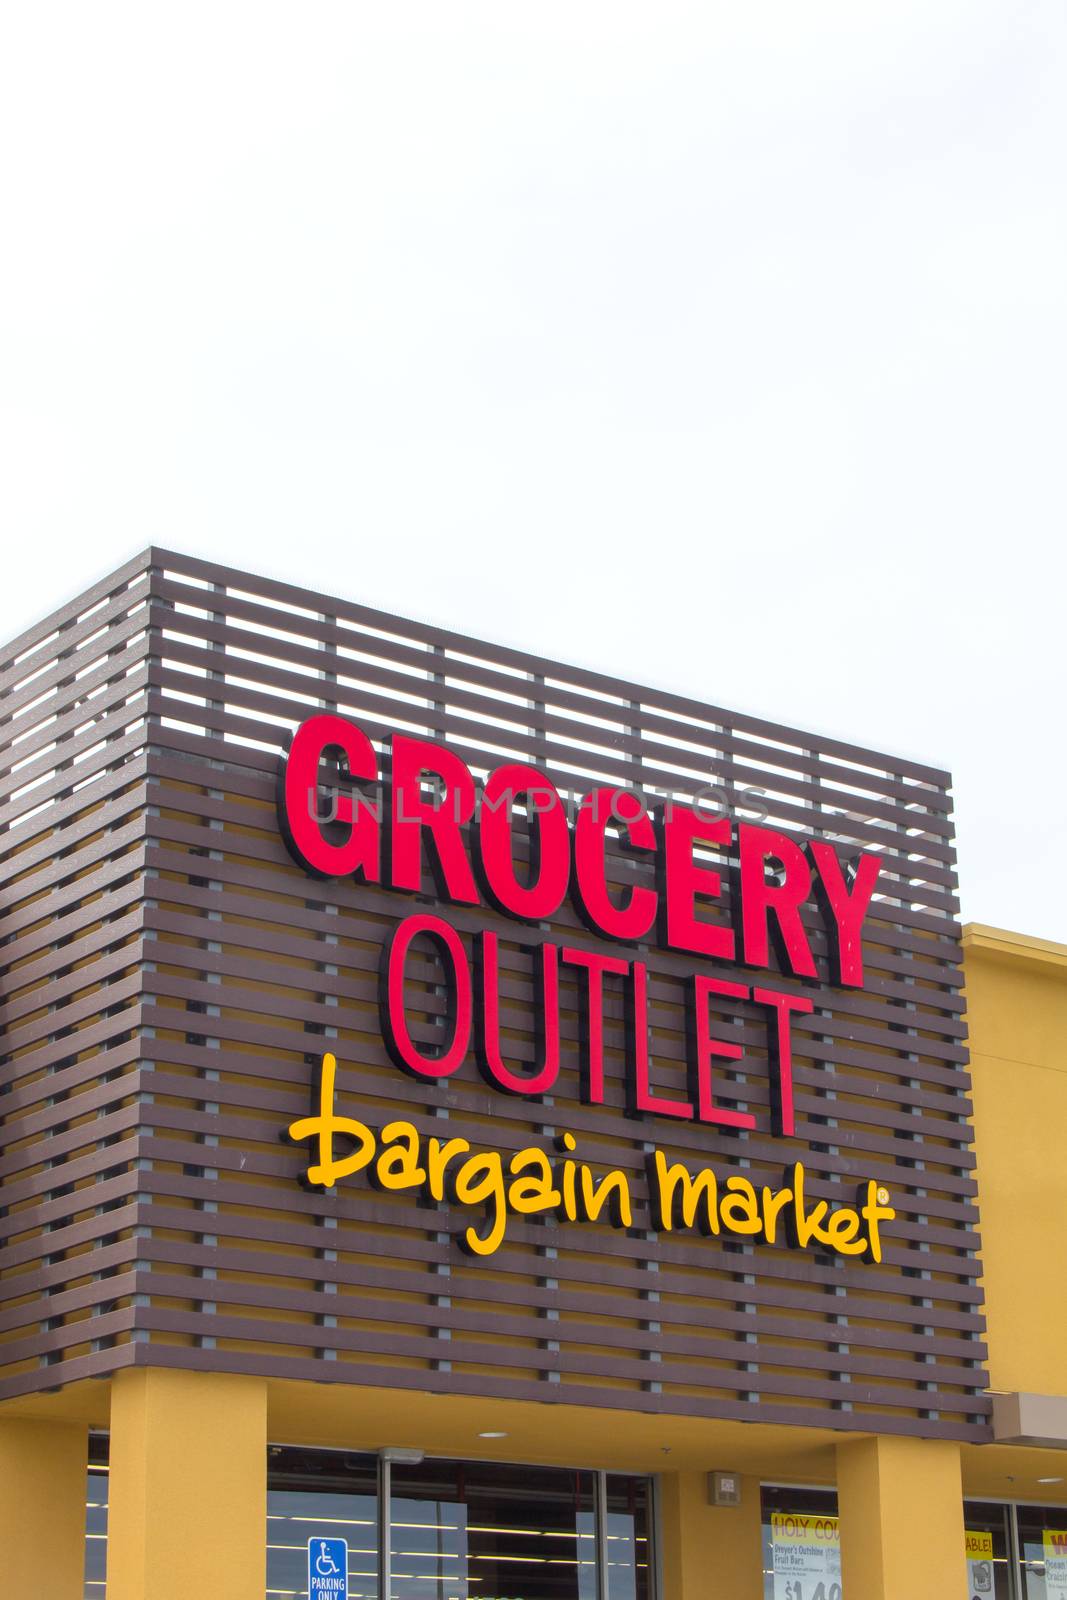  Grocery Outlet storefront and sign by wolterk